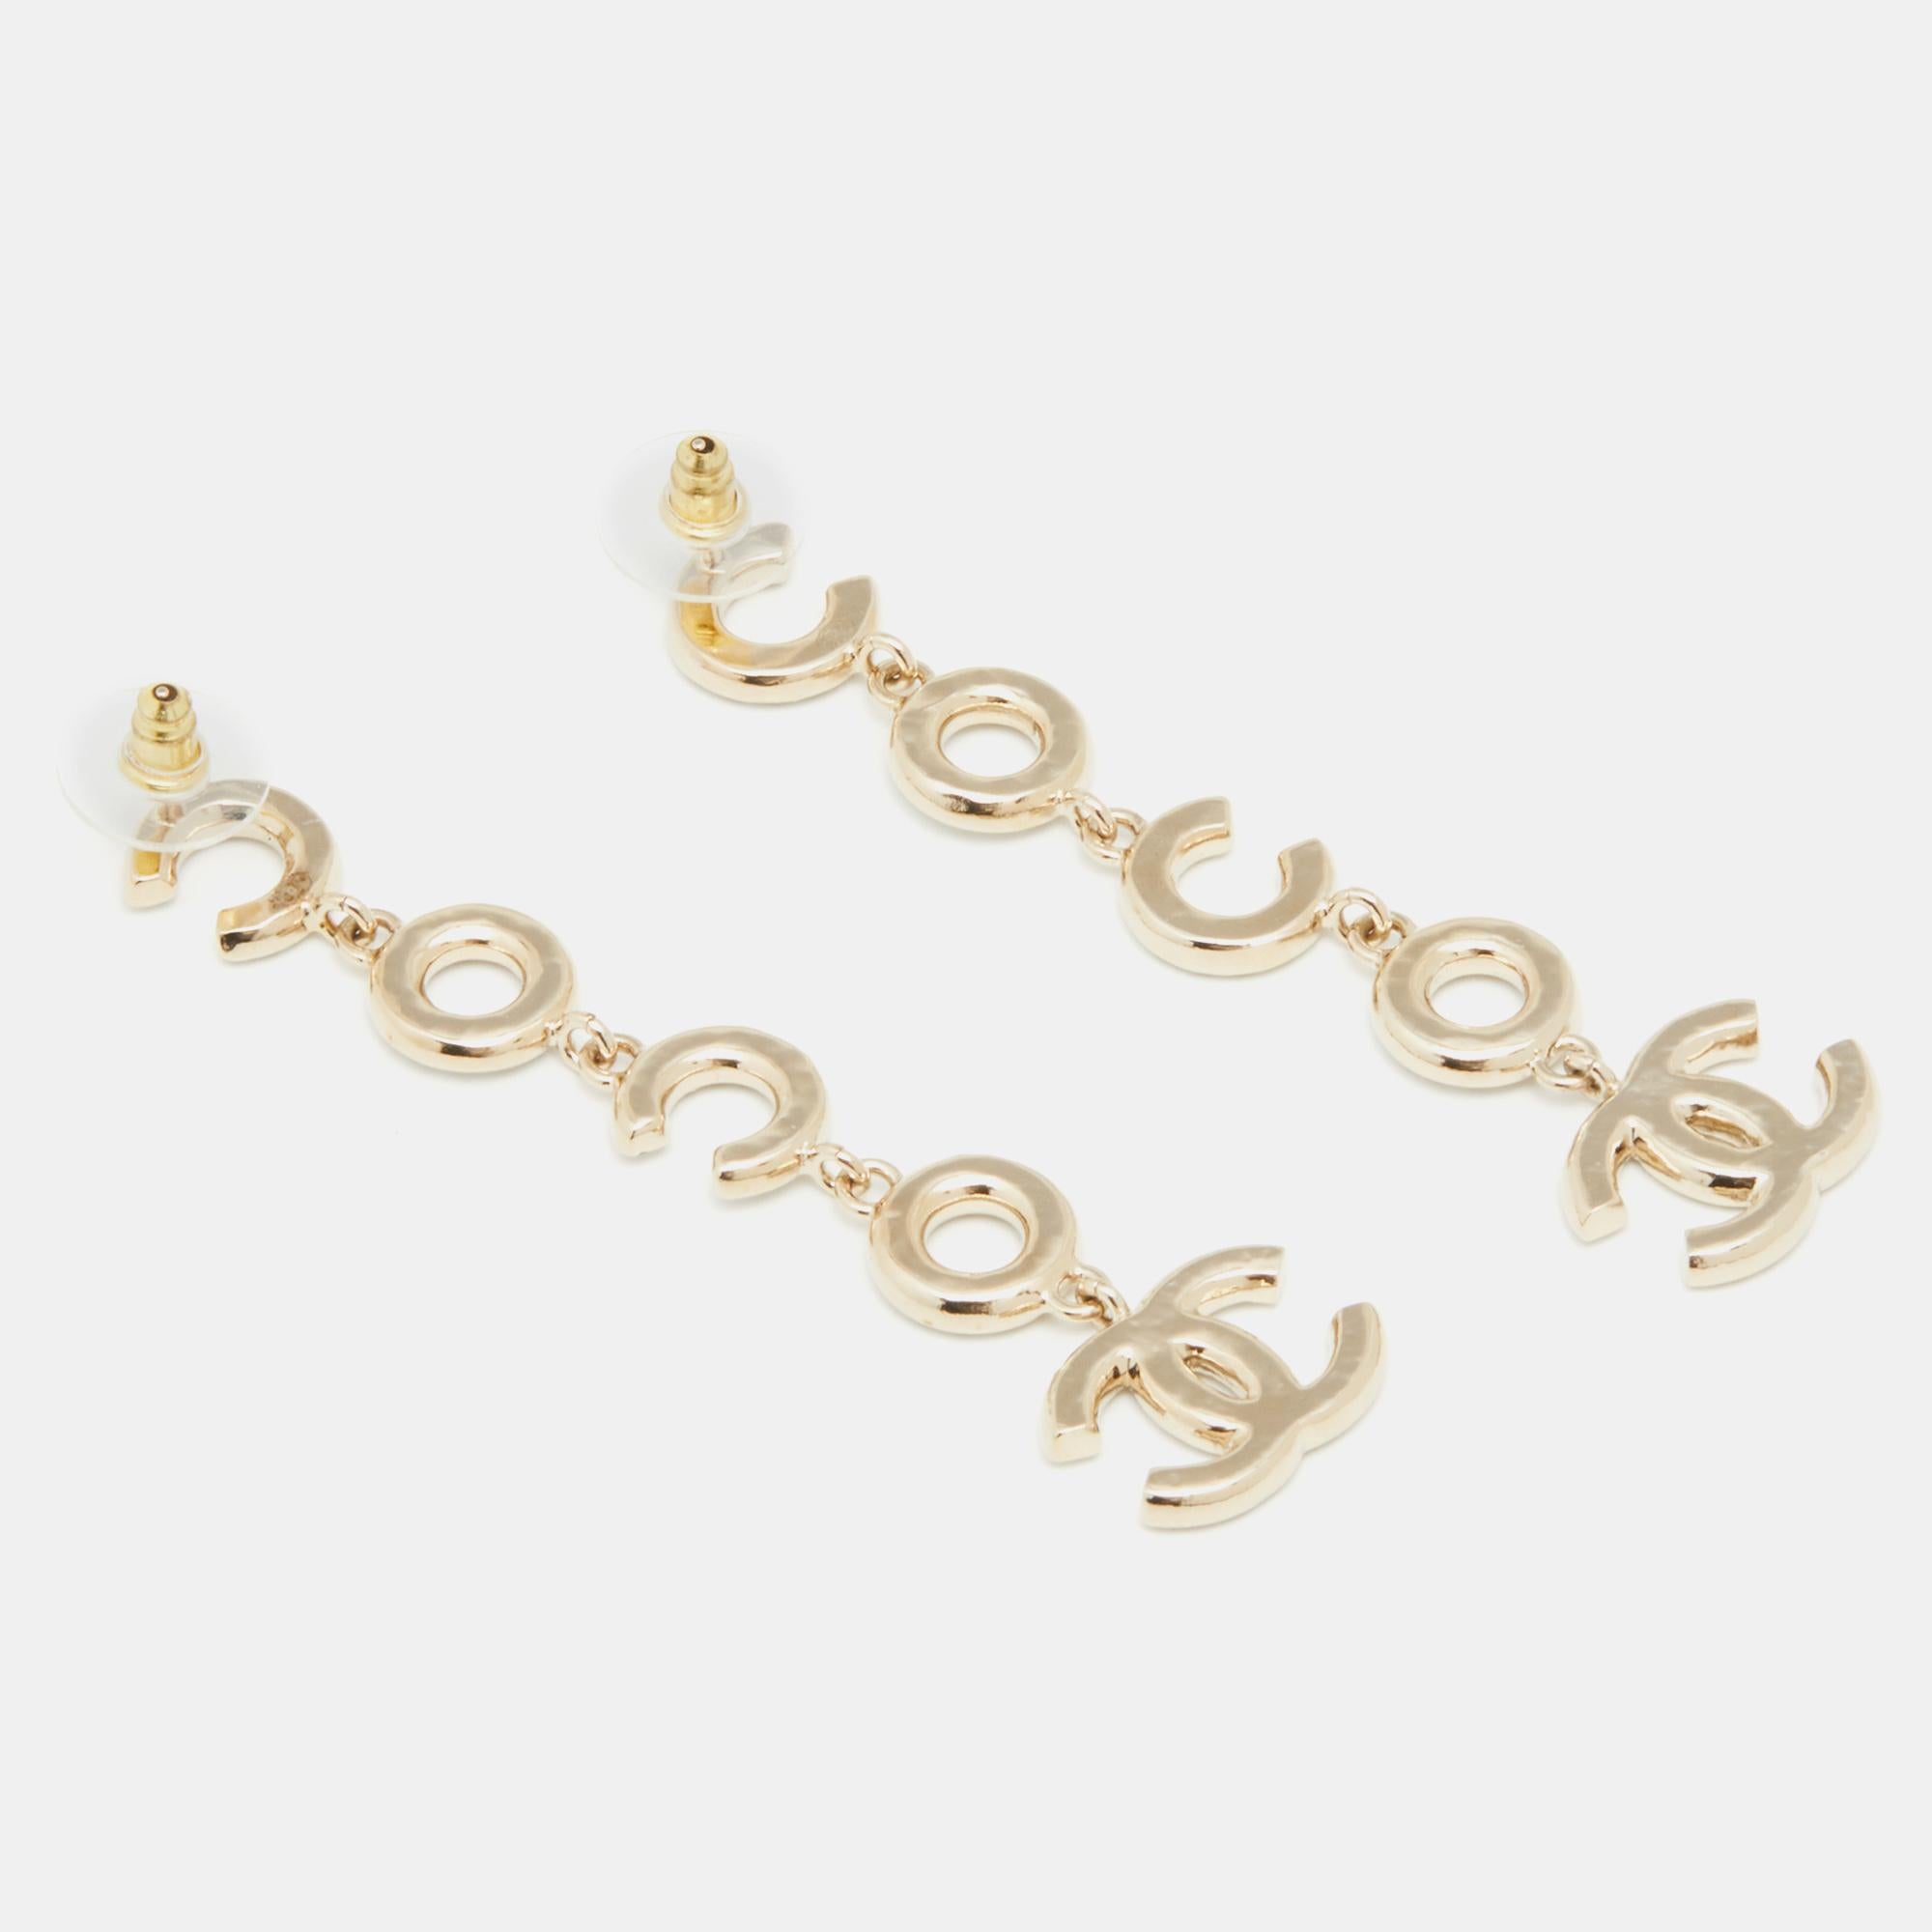 Designed with gold-tone metal, these long earrings from Chanel will complement an evening look with ease. They feature faux pearls and the iconic CC logo motifs. Highlight your outfits with this elegant pair.

Includes: Original Box